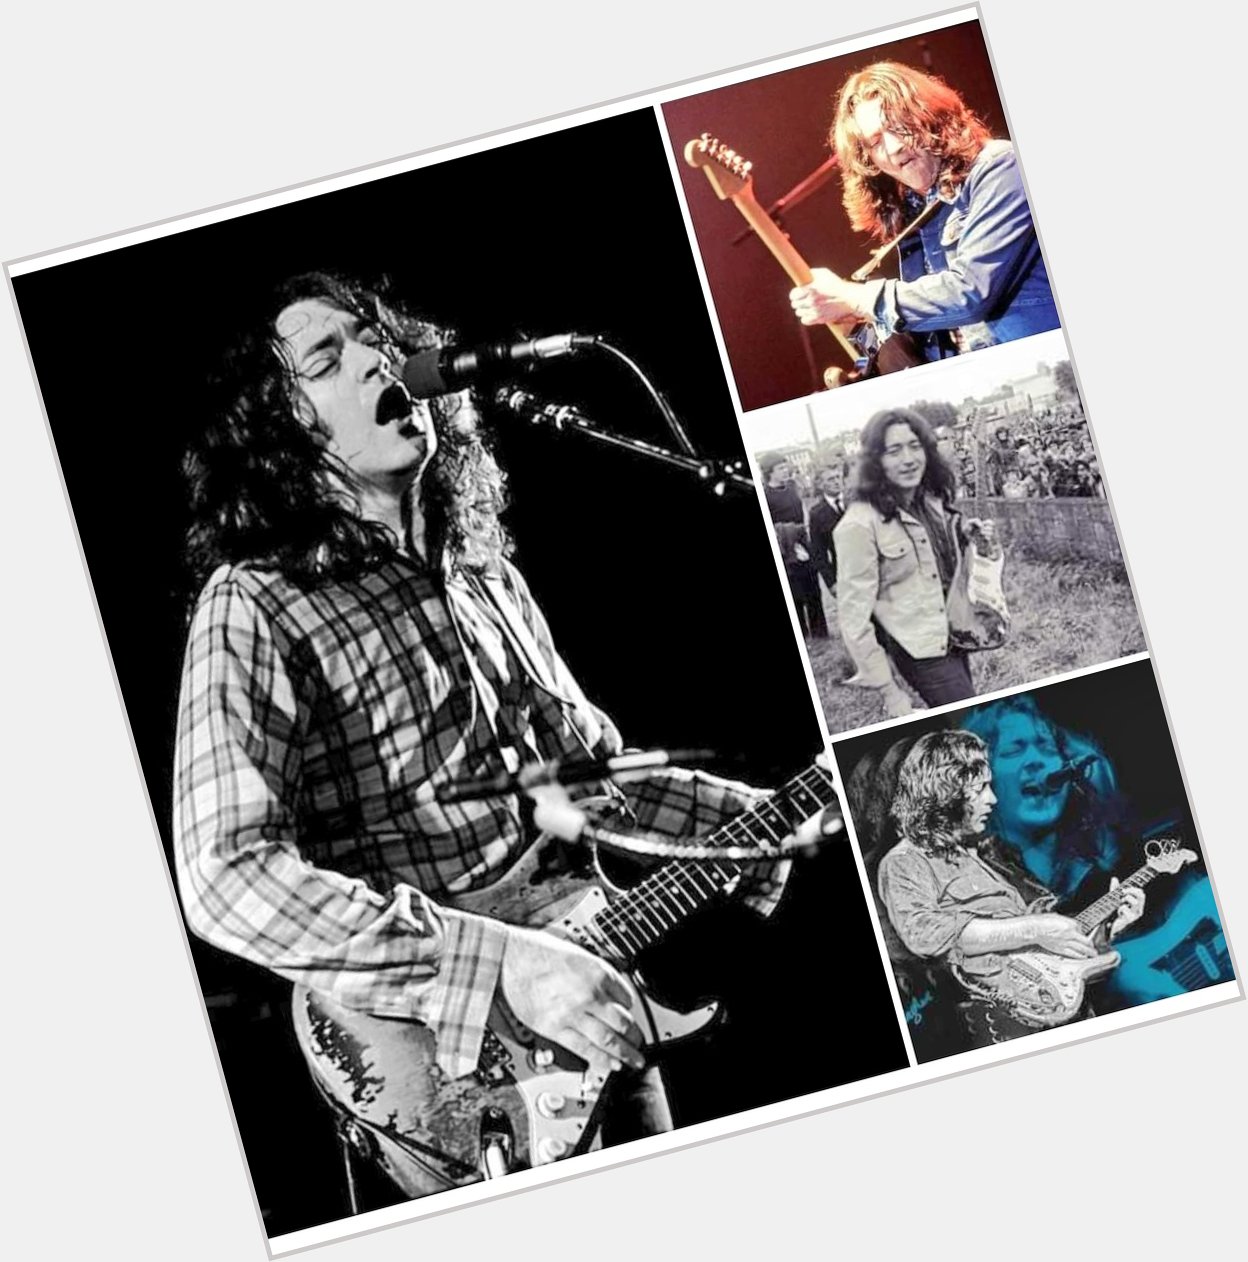 Happy heavenly birthday  RORY GALLAGHER (1948 - 1995). 
Gone, but not forgotten!

What\s your favorite album? 